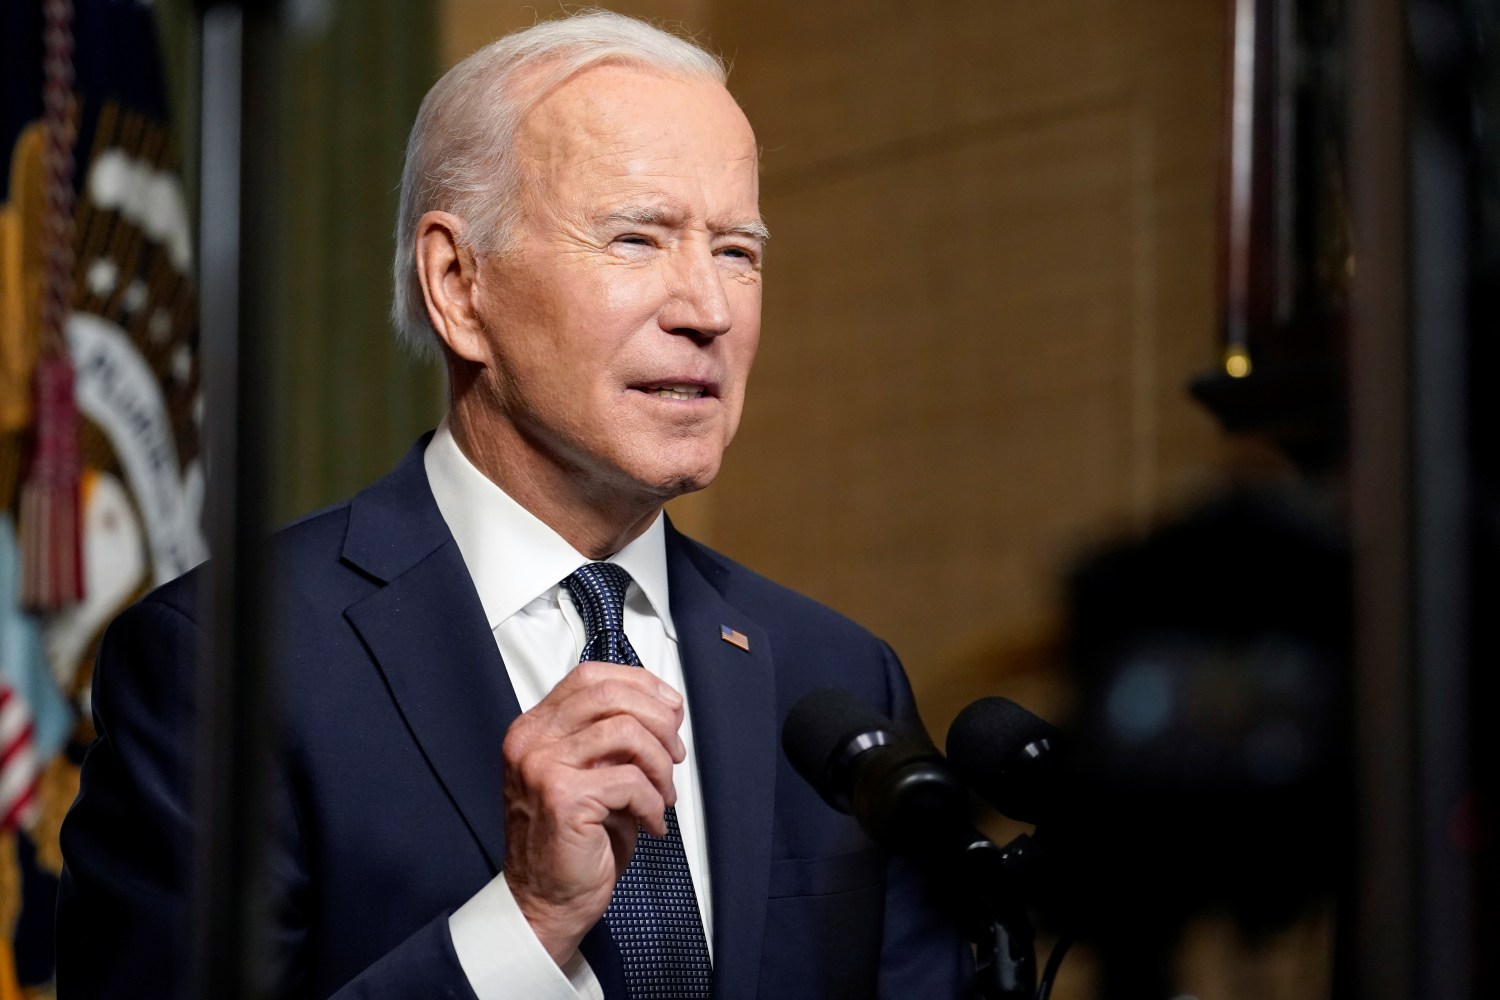 U.S. President Joe Biden leaves delivers remarks on his plan to withdraw American troops from Afghanistan, at the White House, Washington, U.S., April 14, 2021. Andrew Harnik/Pool via REUTERS